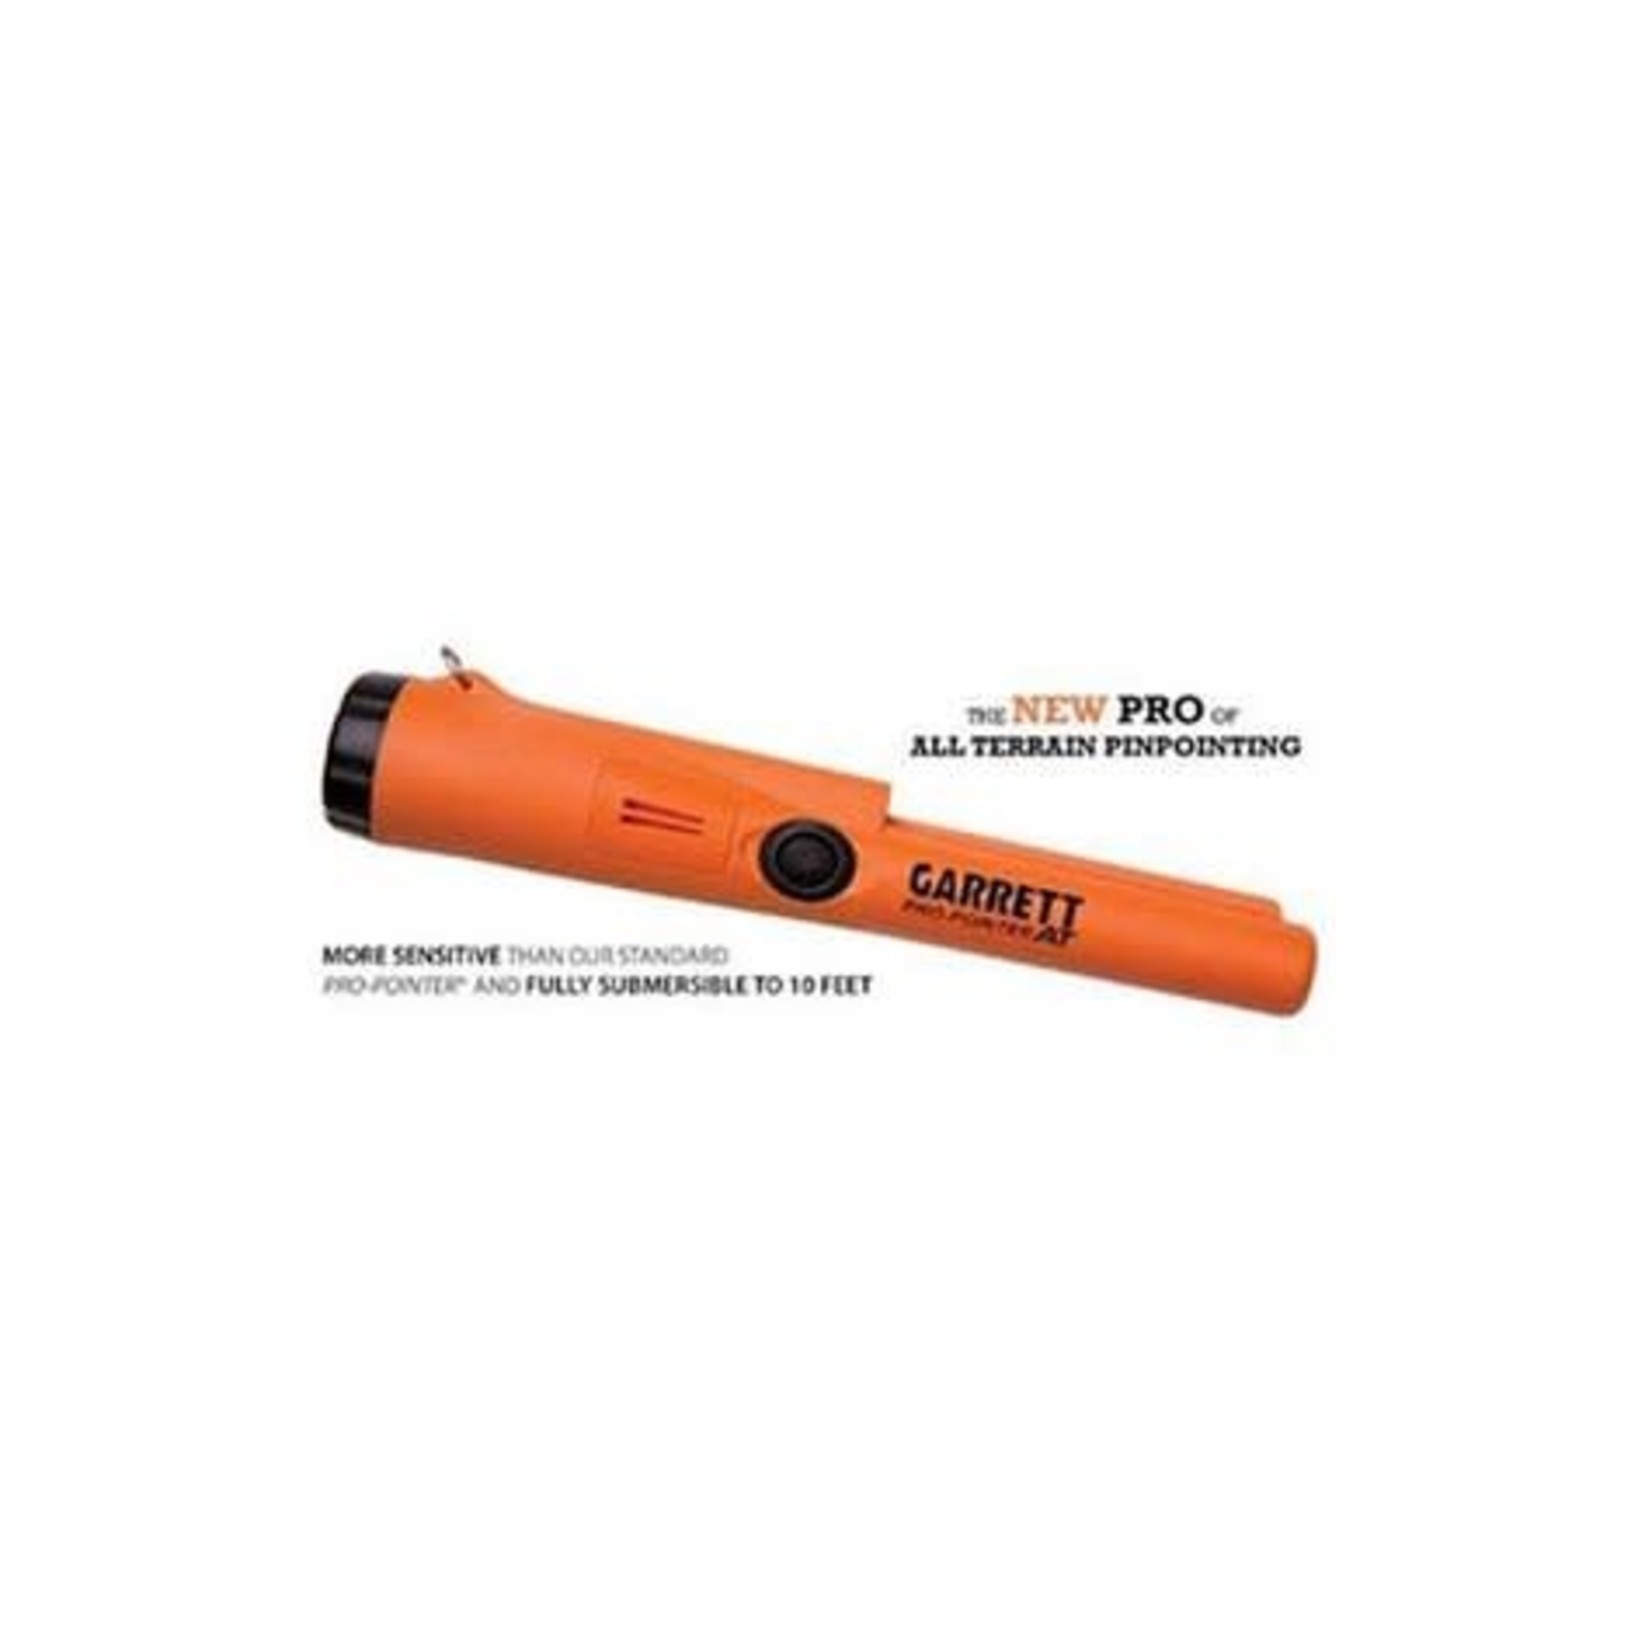 Garrett Metal Detectors Garrett Metal Detectors Pro-Pointer AT Pinpoint Metal Detector #1140900